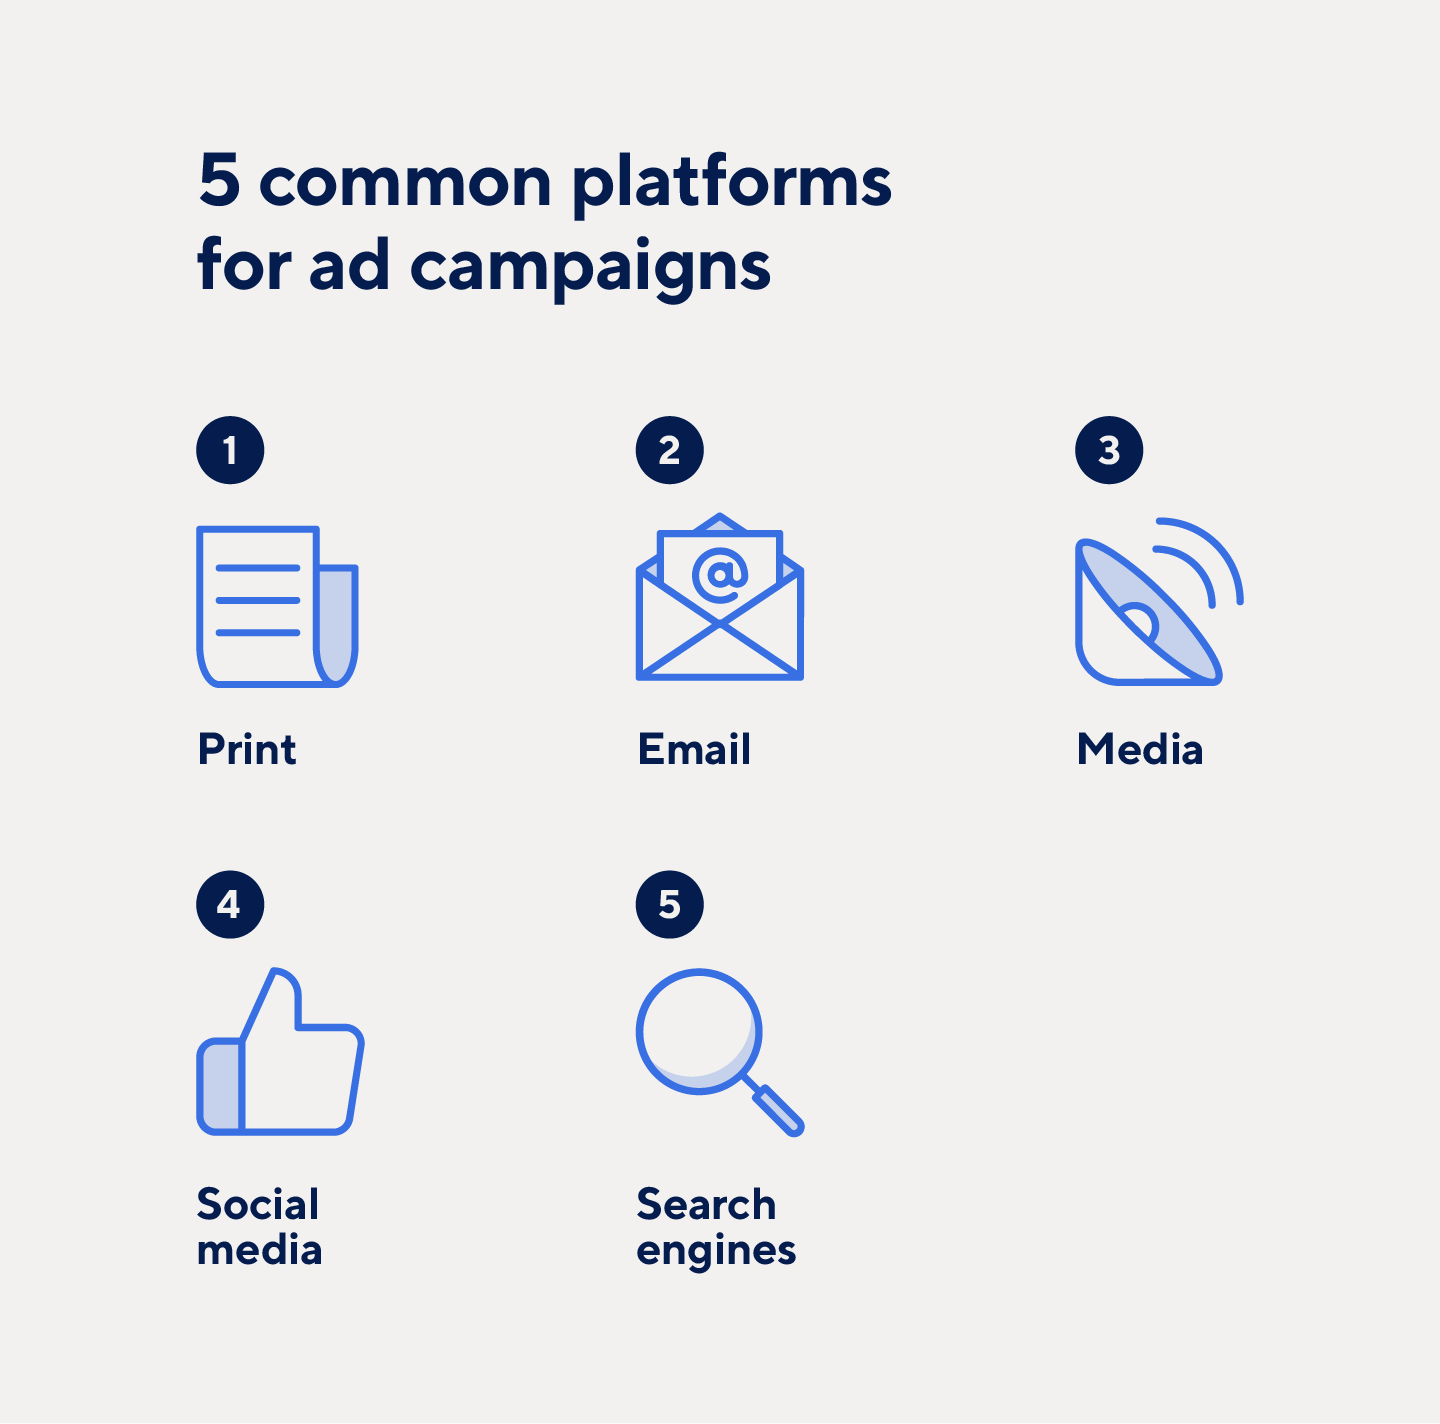 The most common ad campaign platforms include print, email, media, social media, and search engines.